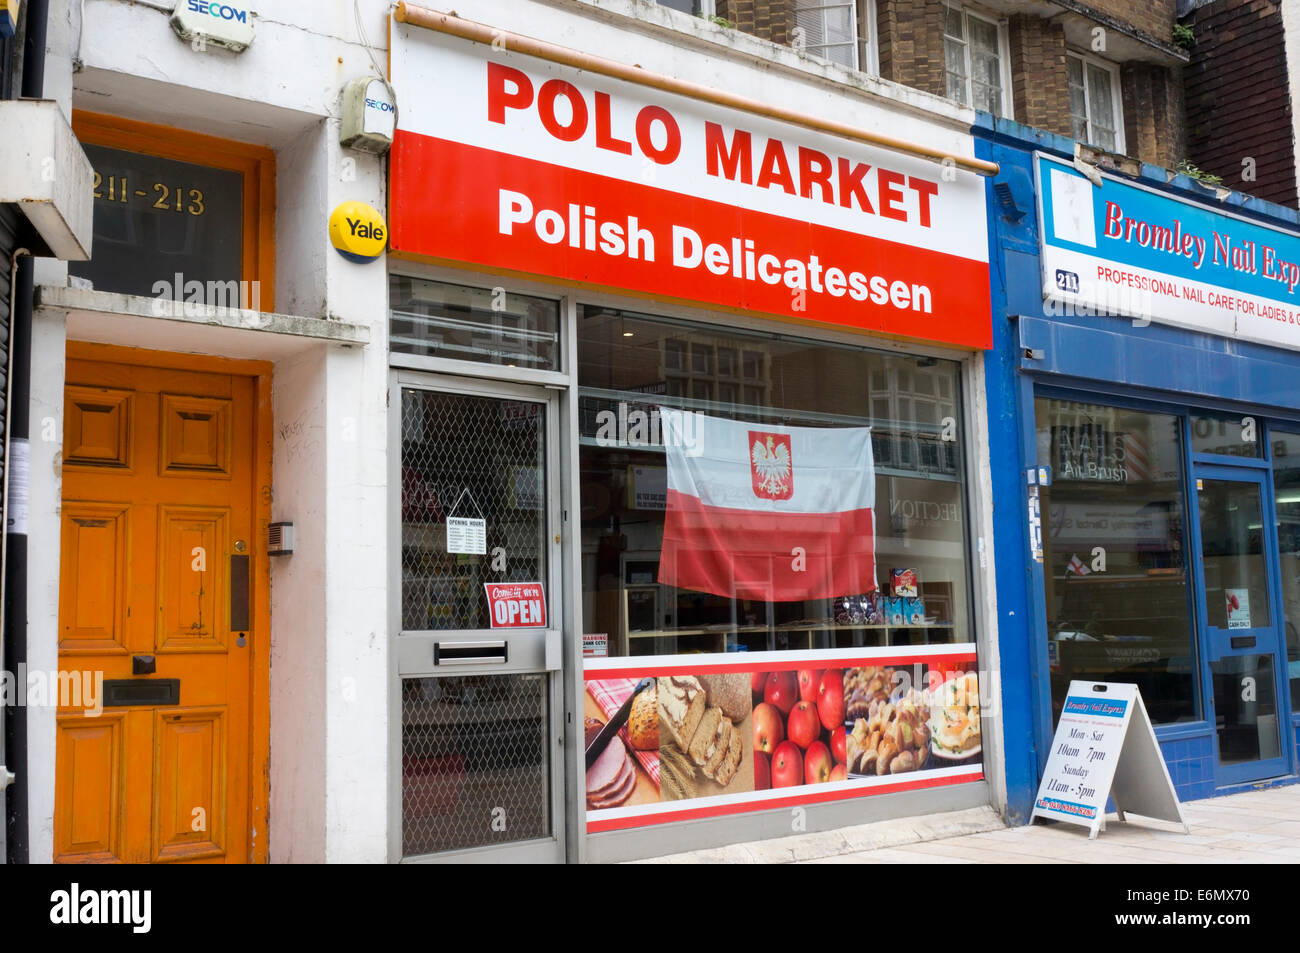 A Polish delicatessen displaying a large Polish flag in the window, in Bromley, Kent. Stock Photo